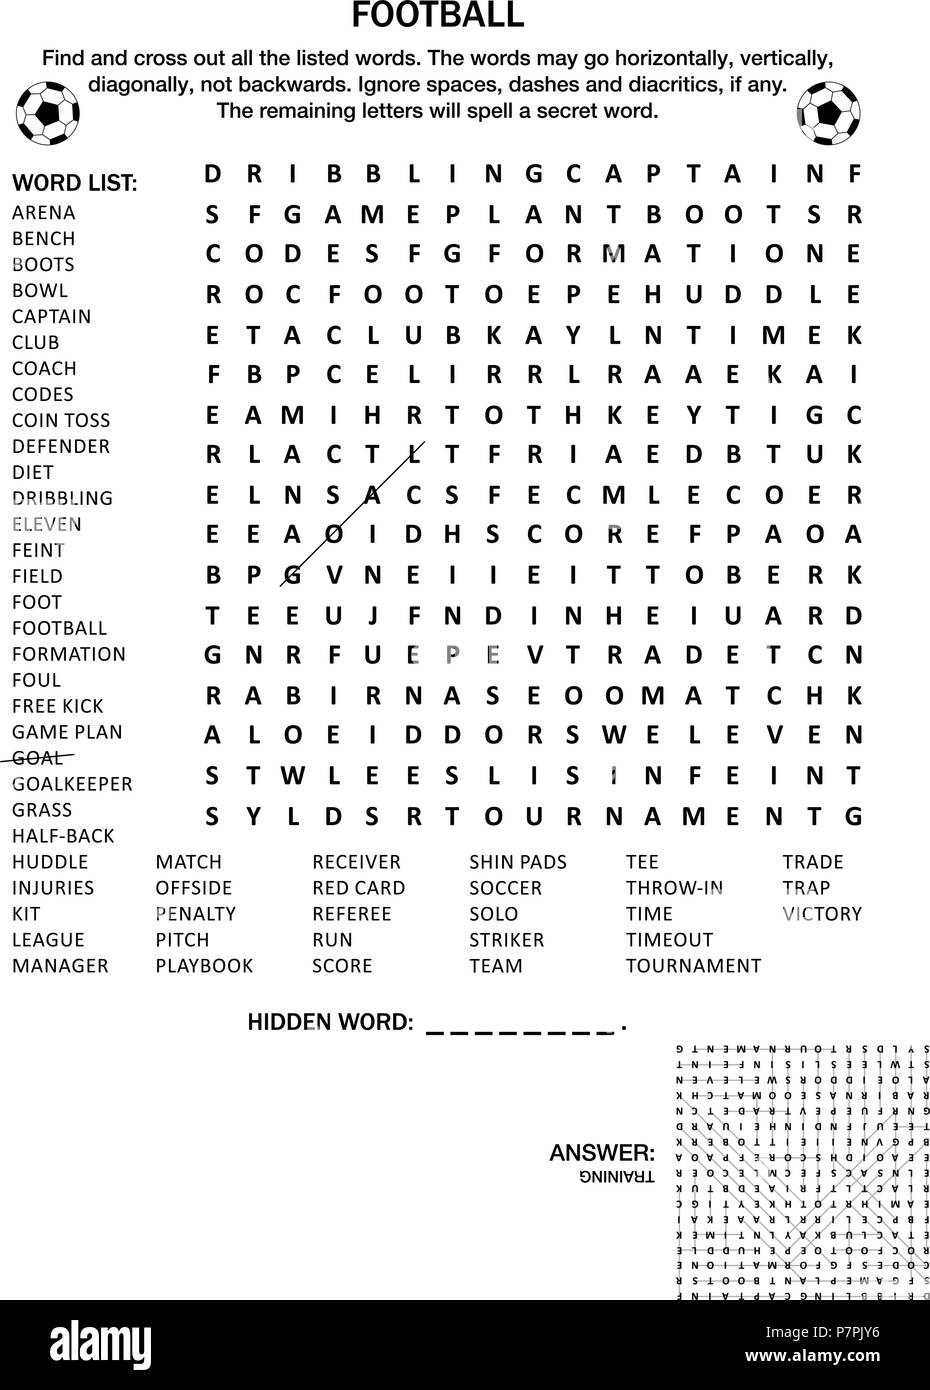 Football Word Search Vocabulary Work Sheet Crossword Puzzle And More ...